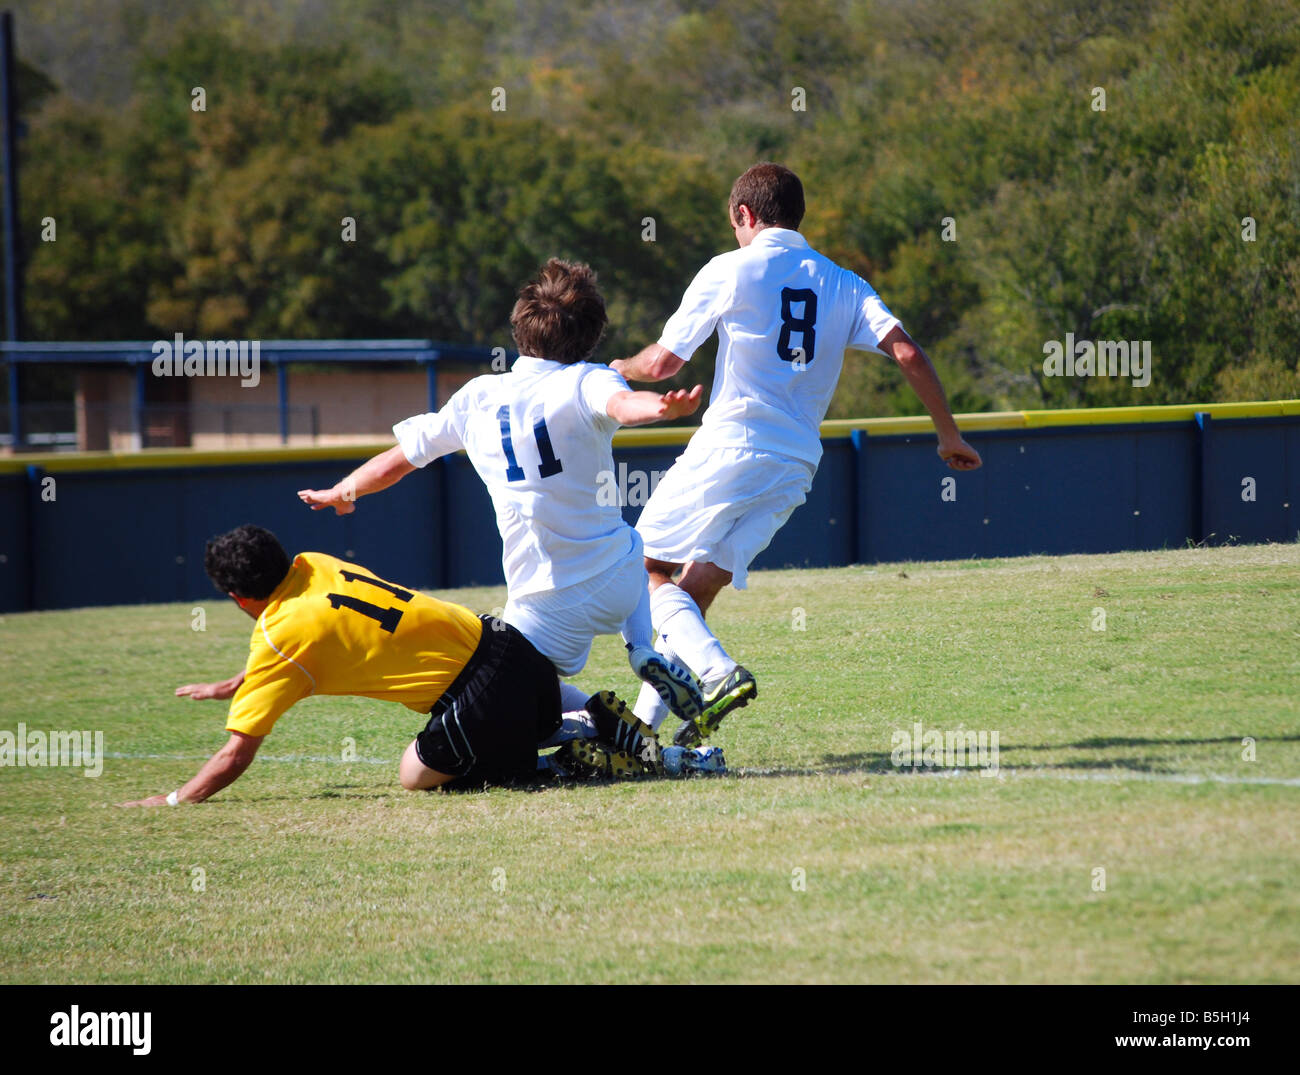 College soccer players fighting for the soccer ball Stock Photo